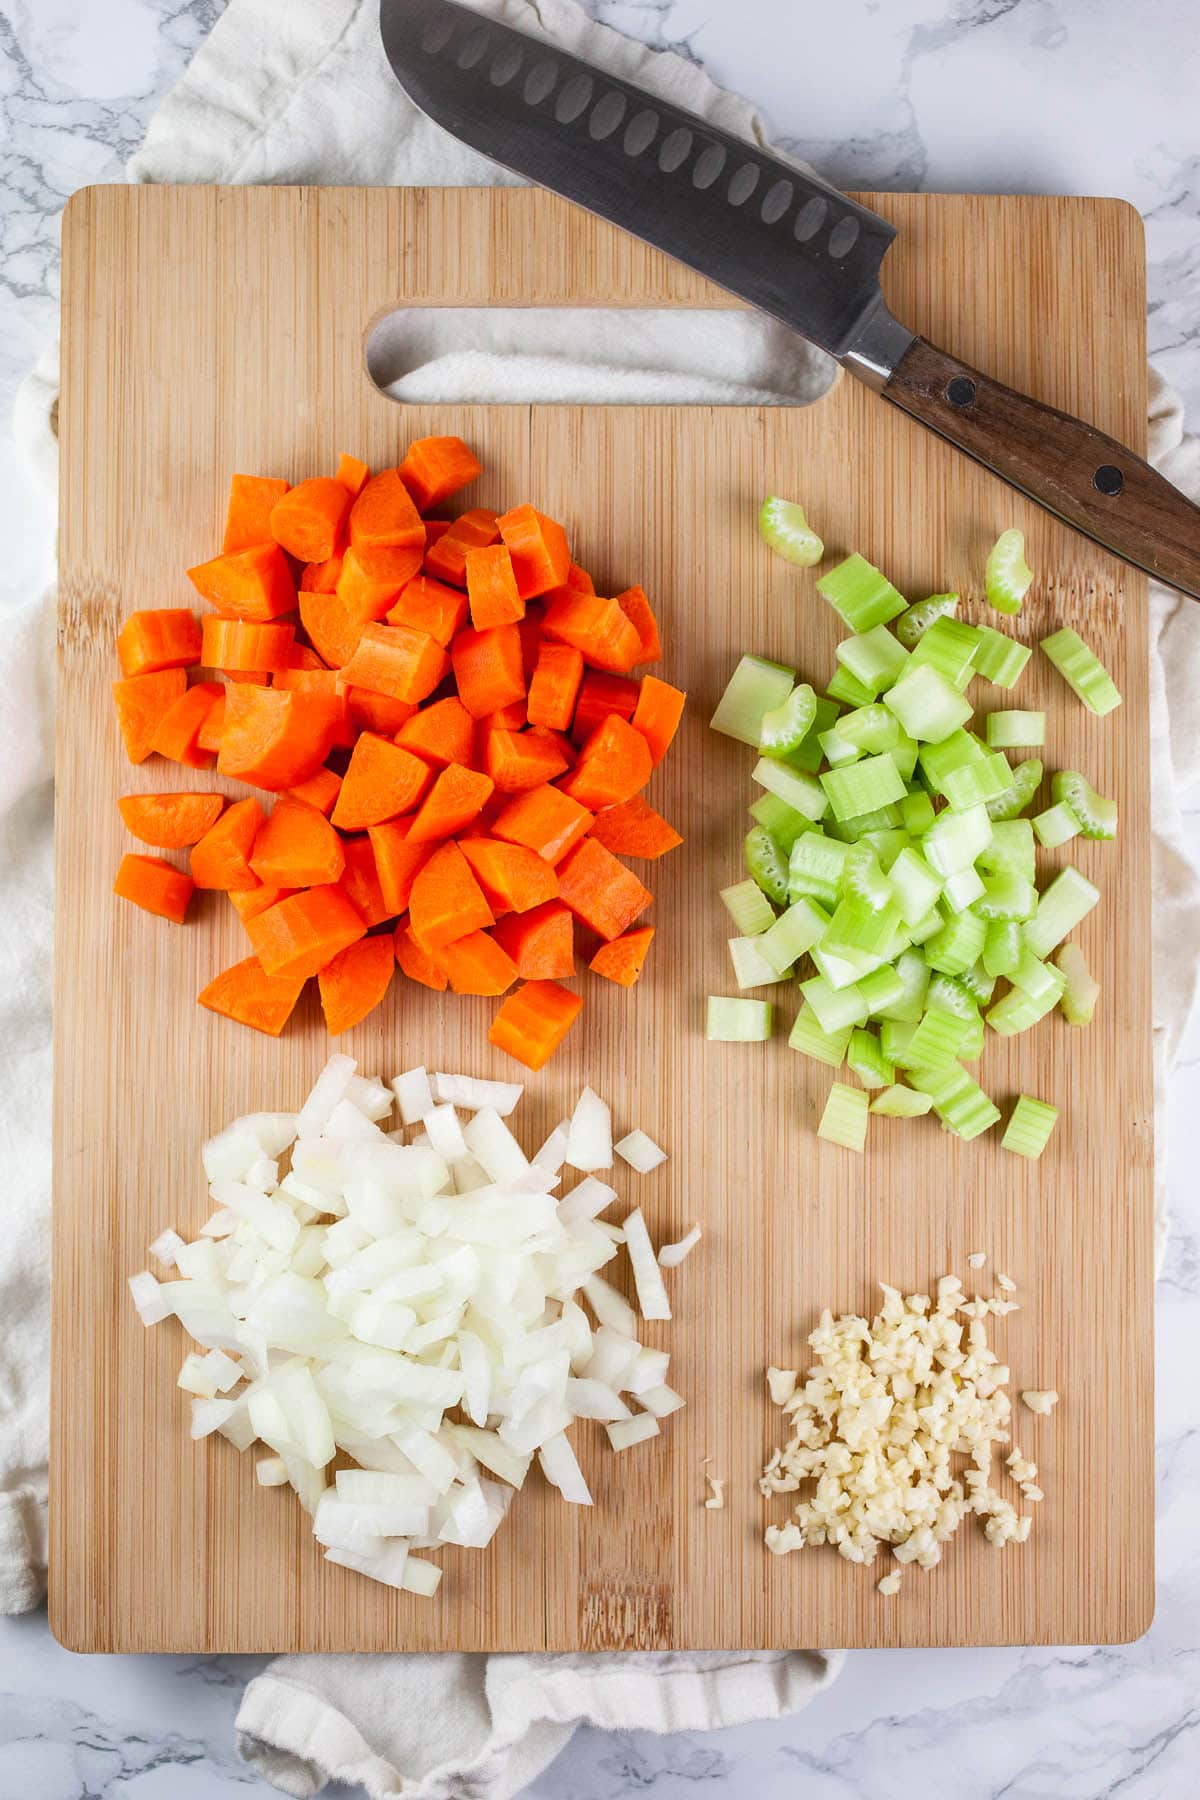 Minced garlic and onions and chopped celery and carrots on wooden cutting board with knife.